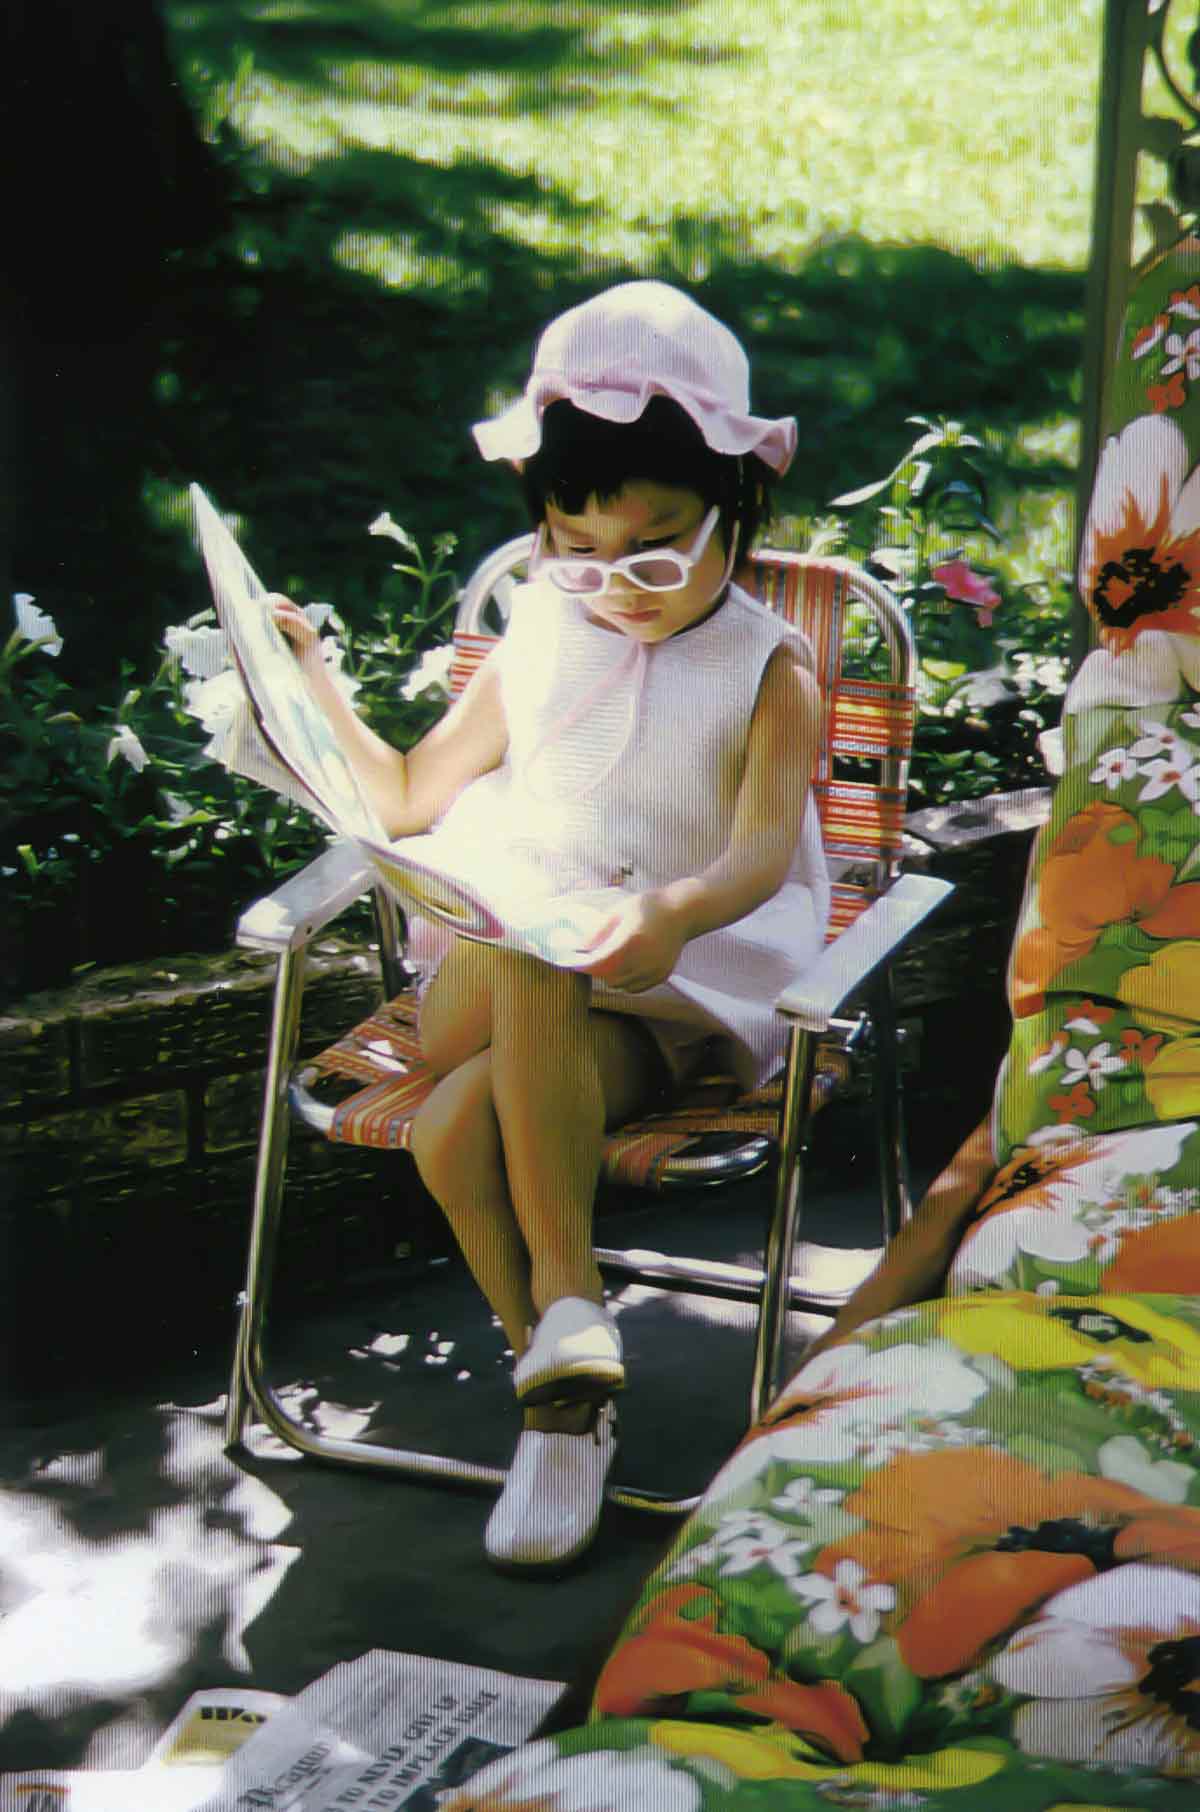 Little girl wearing a hat and sunglasses with legs crossed, sitting outside on a patio chair.